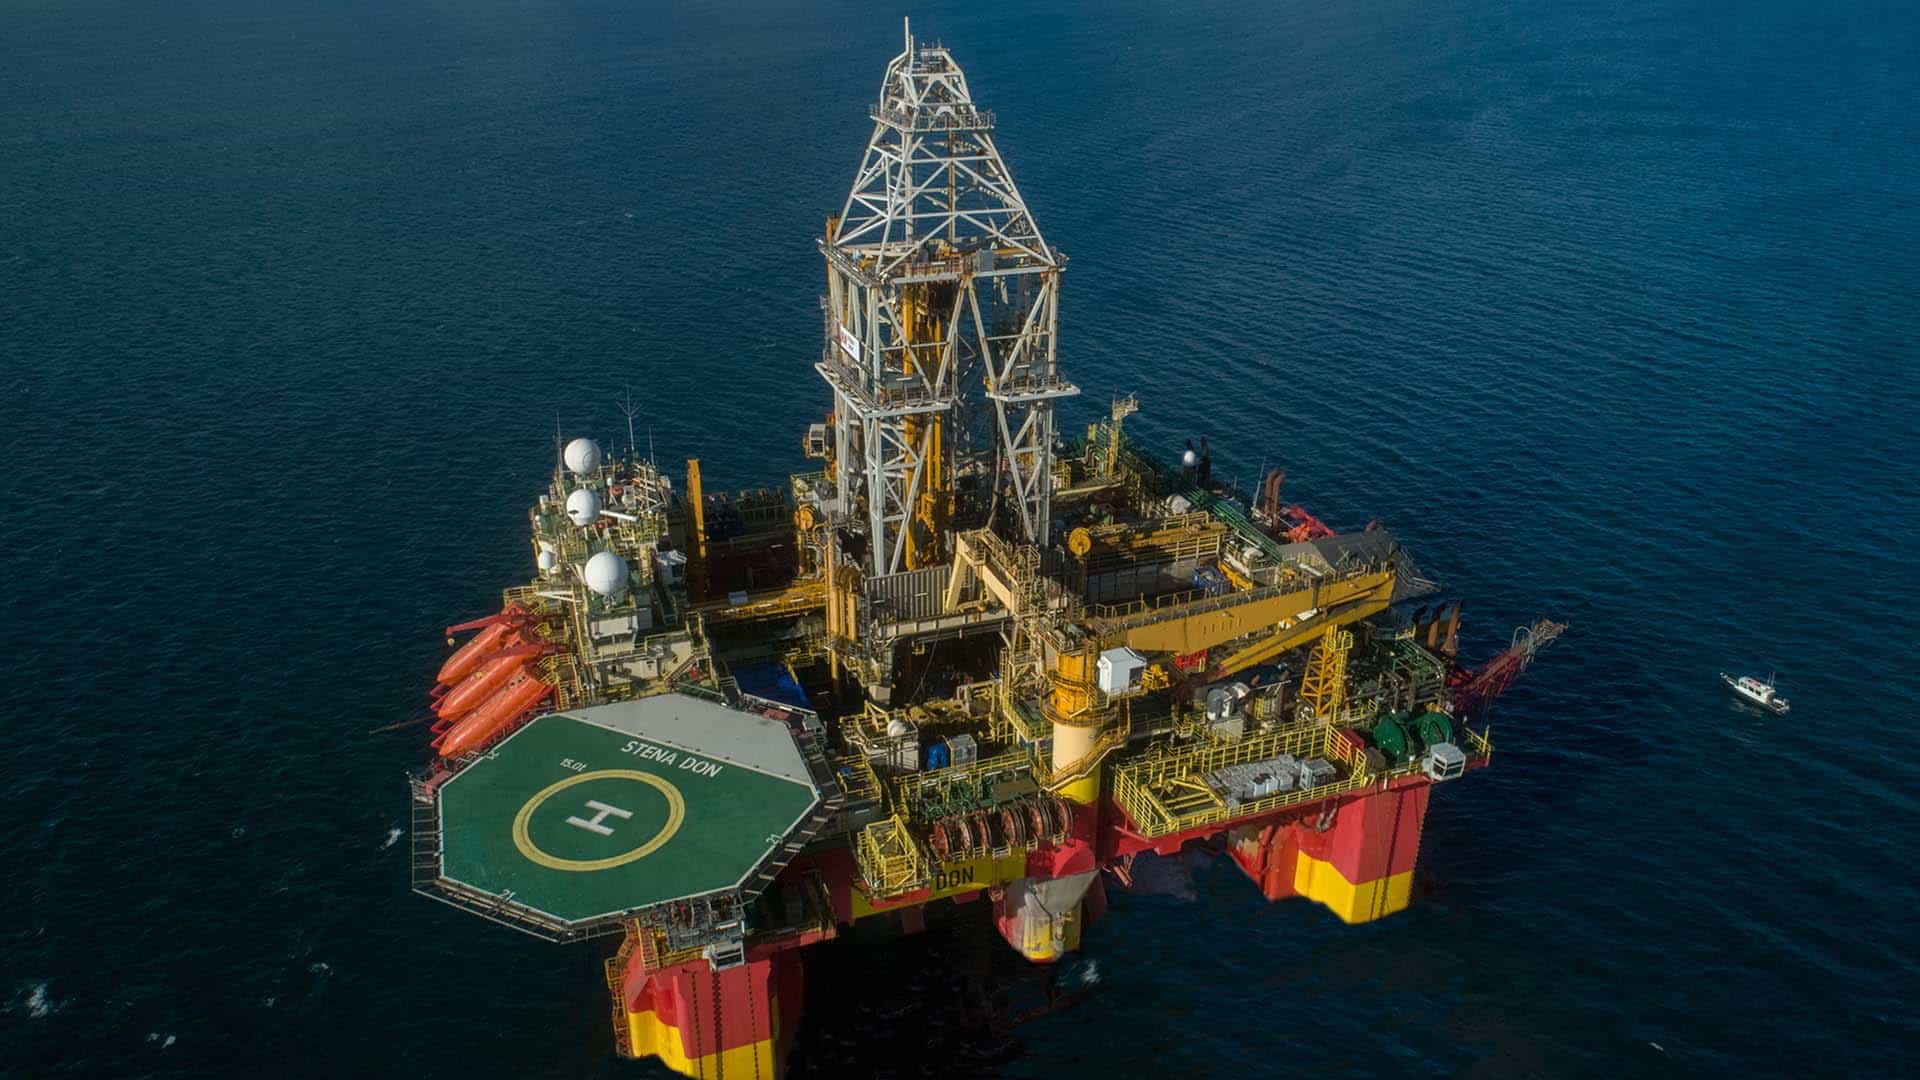 UK oil & gas firms to spud North Sea well in September